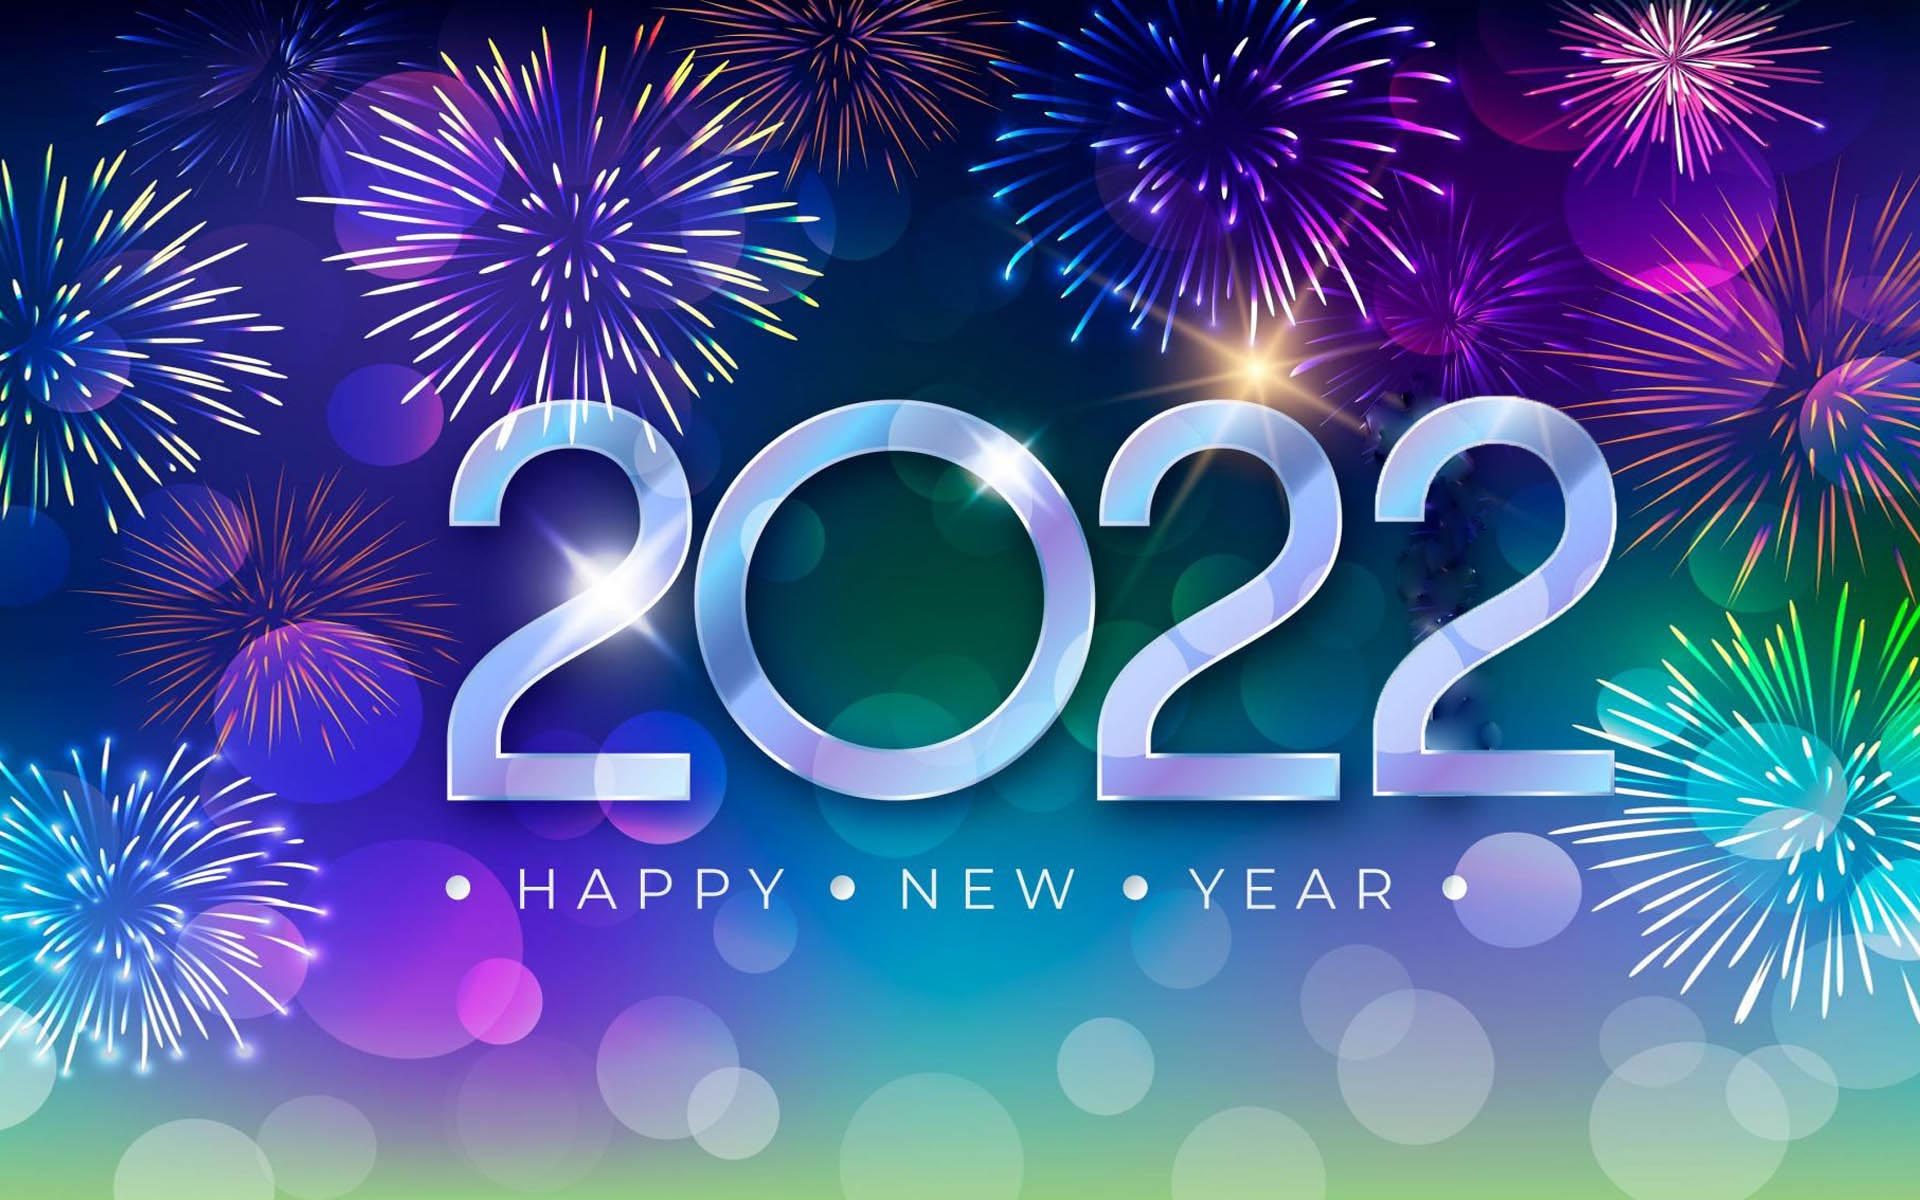 Happy New Year 2022 Blue HD Wallpaper For Laptop And Tablet Free Download, Wallpaper13.com